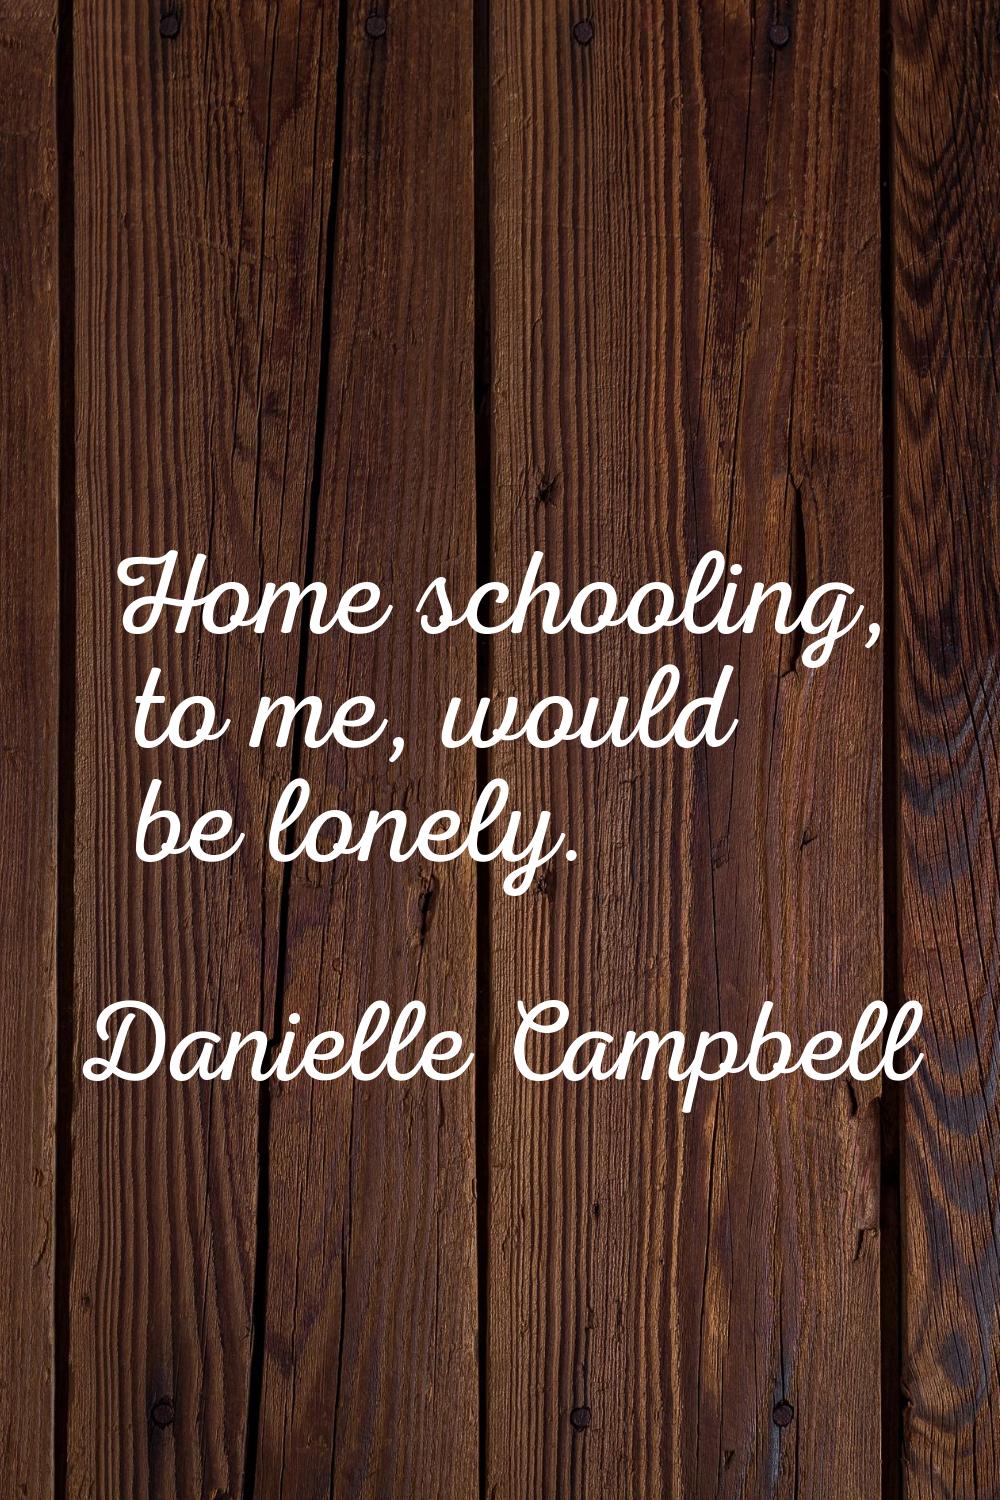 Home schooling, to me, would be lonely.